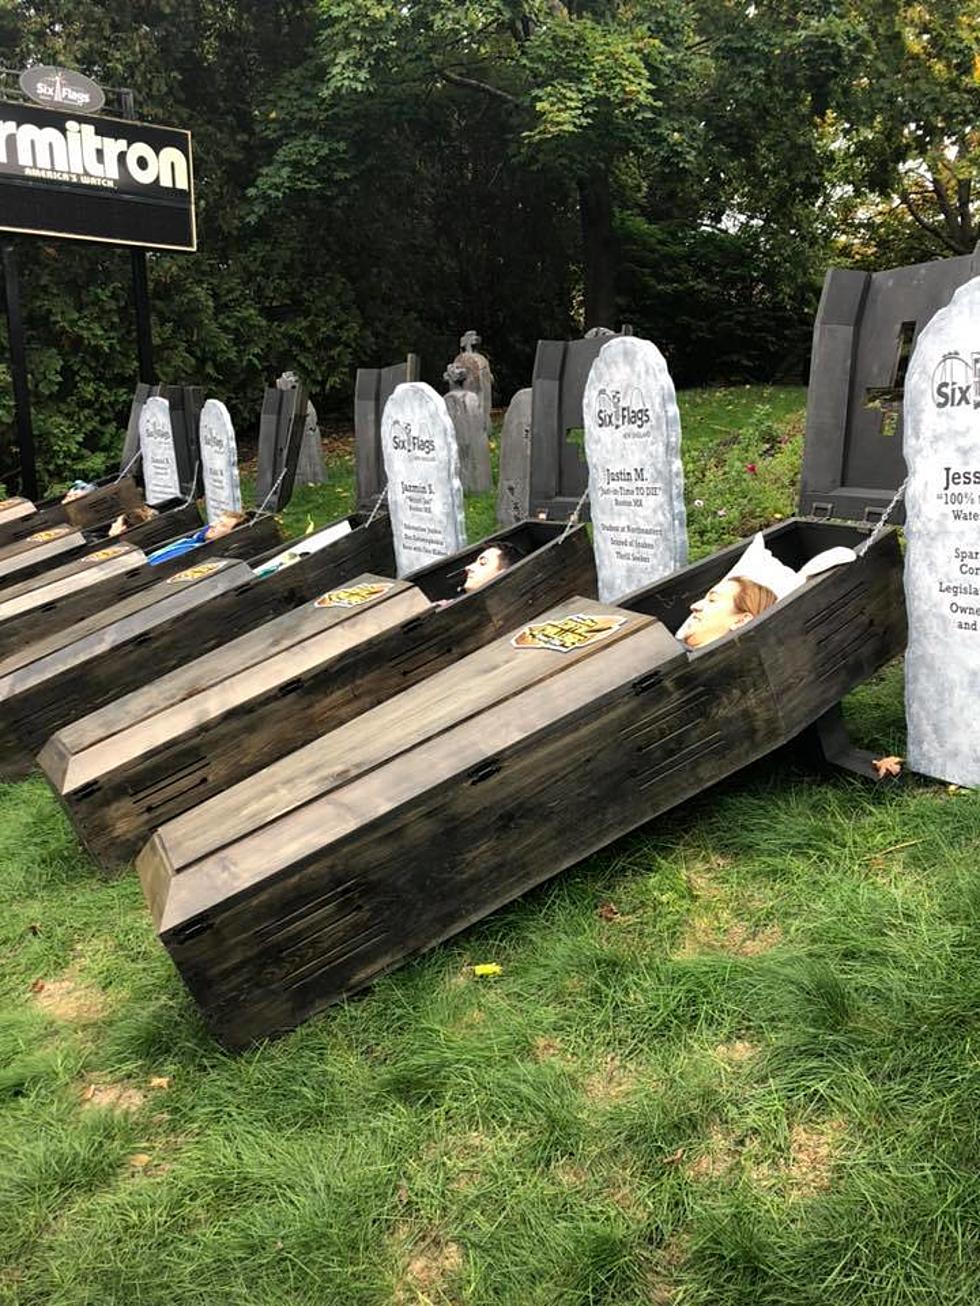 An Open Letter to Six Flags’ ‘Coffin Challenge’ Organizers